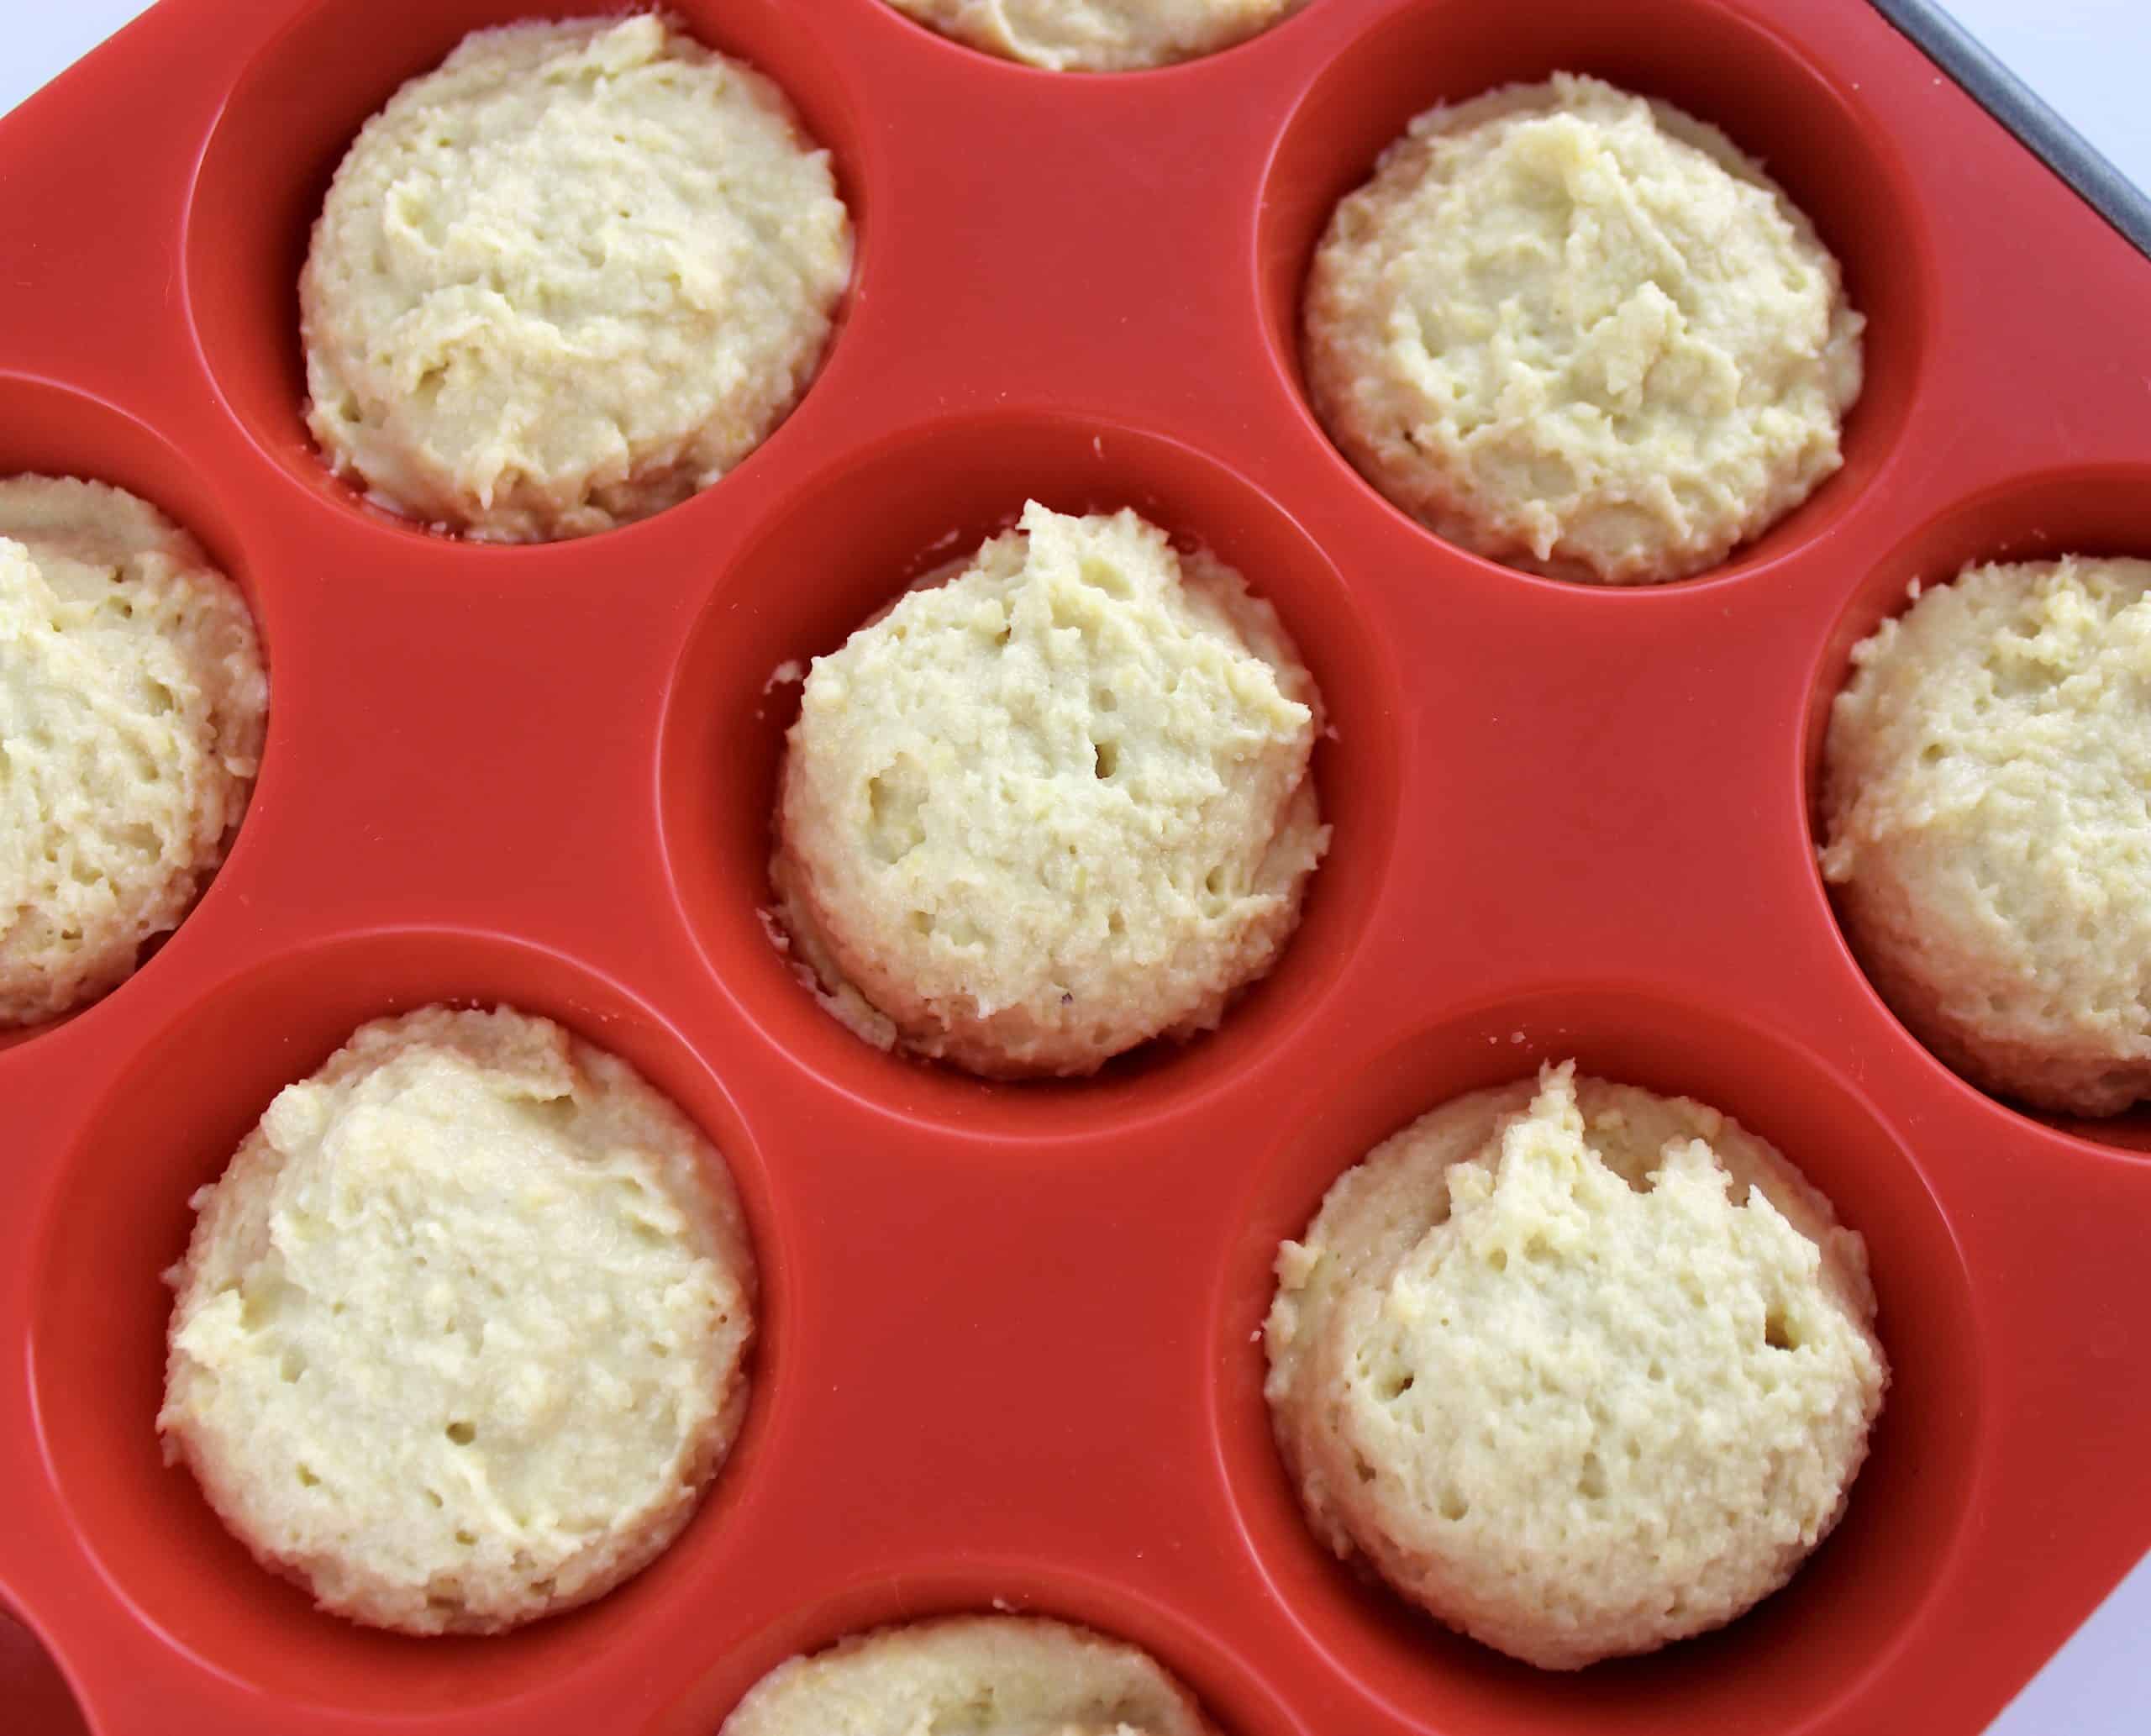 Keto Biscuits batter unbaked in red silicone muffin pan